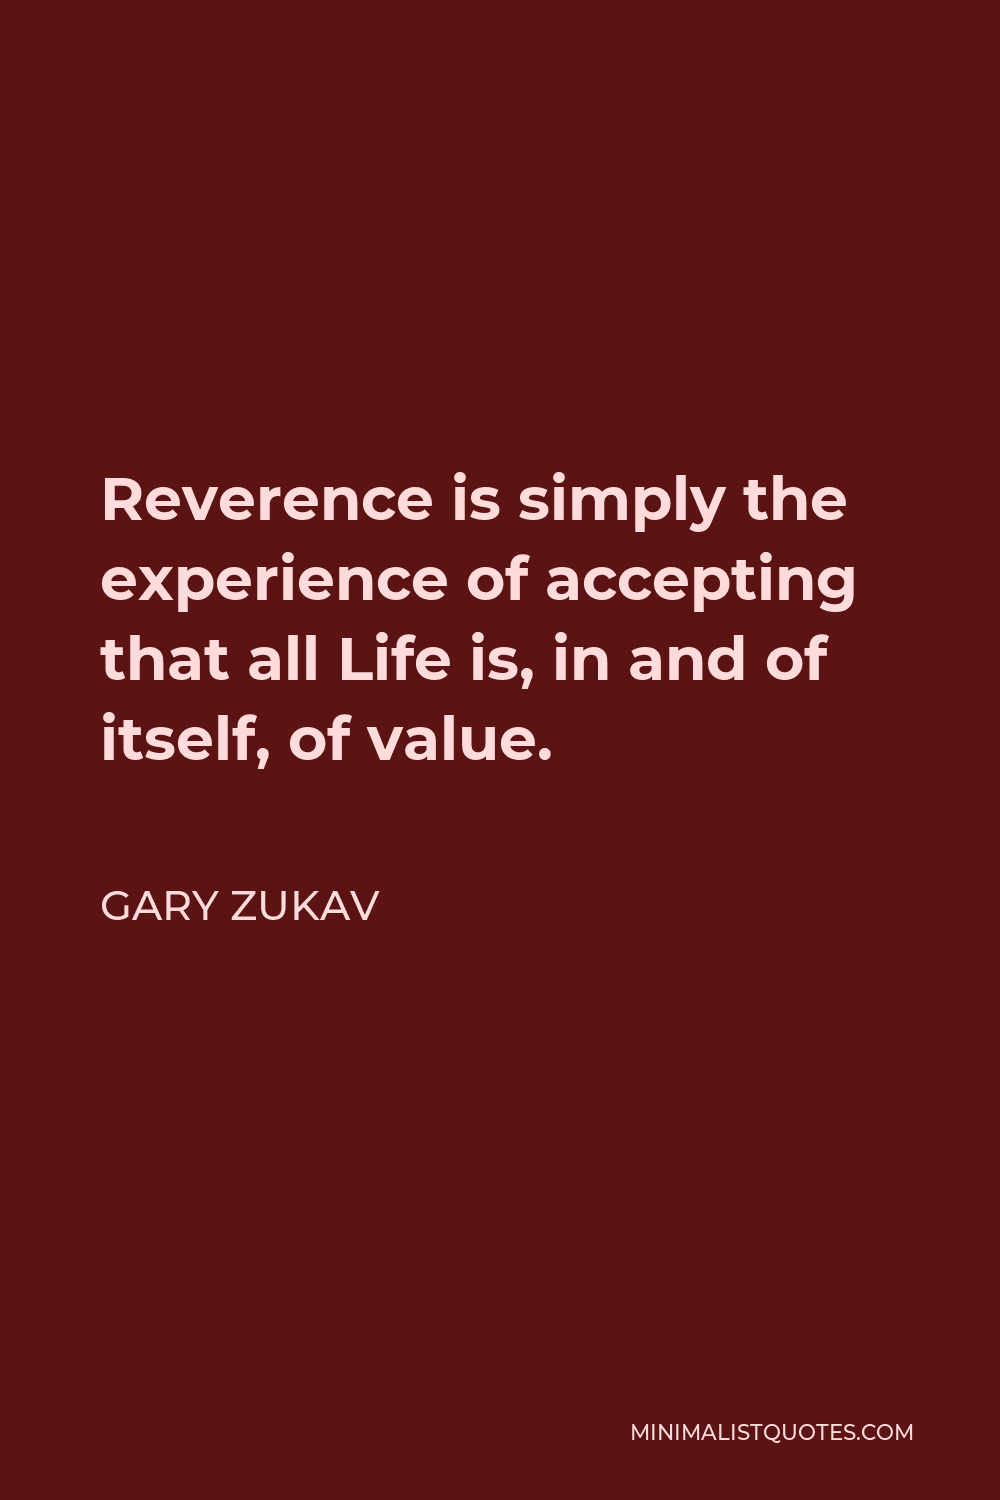 Gary Zukav Quote - Reverence is simply the experience of accepting that all Life is, in and of itself, of value.